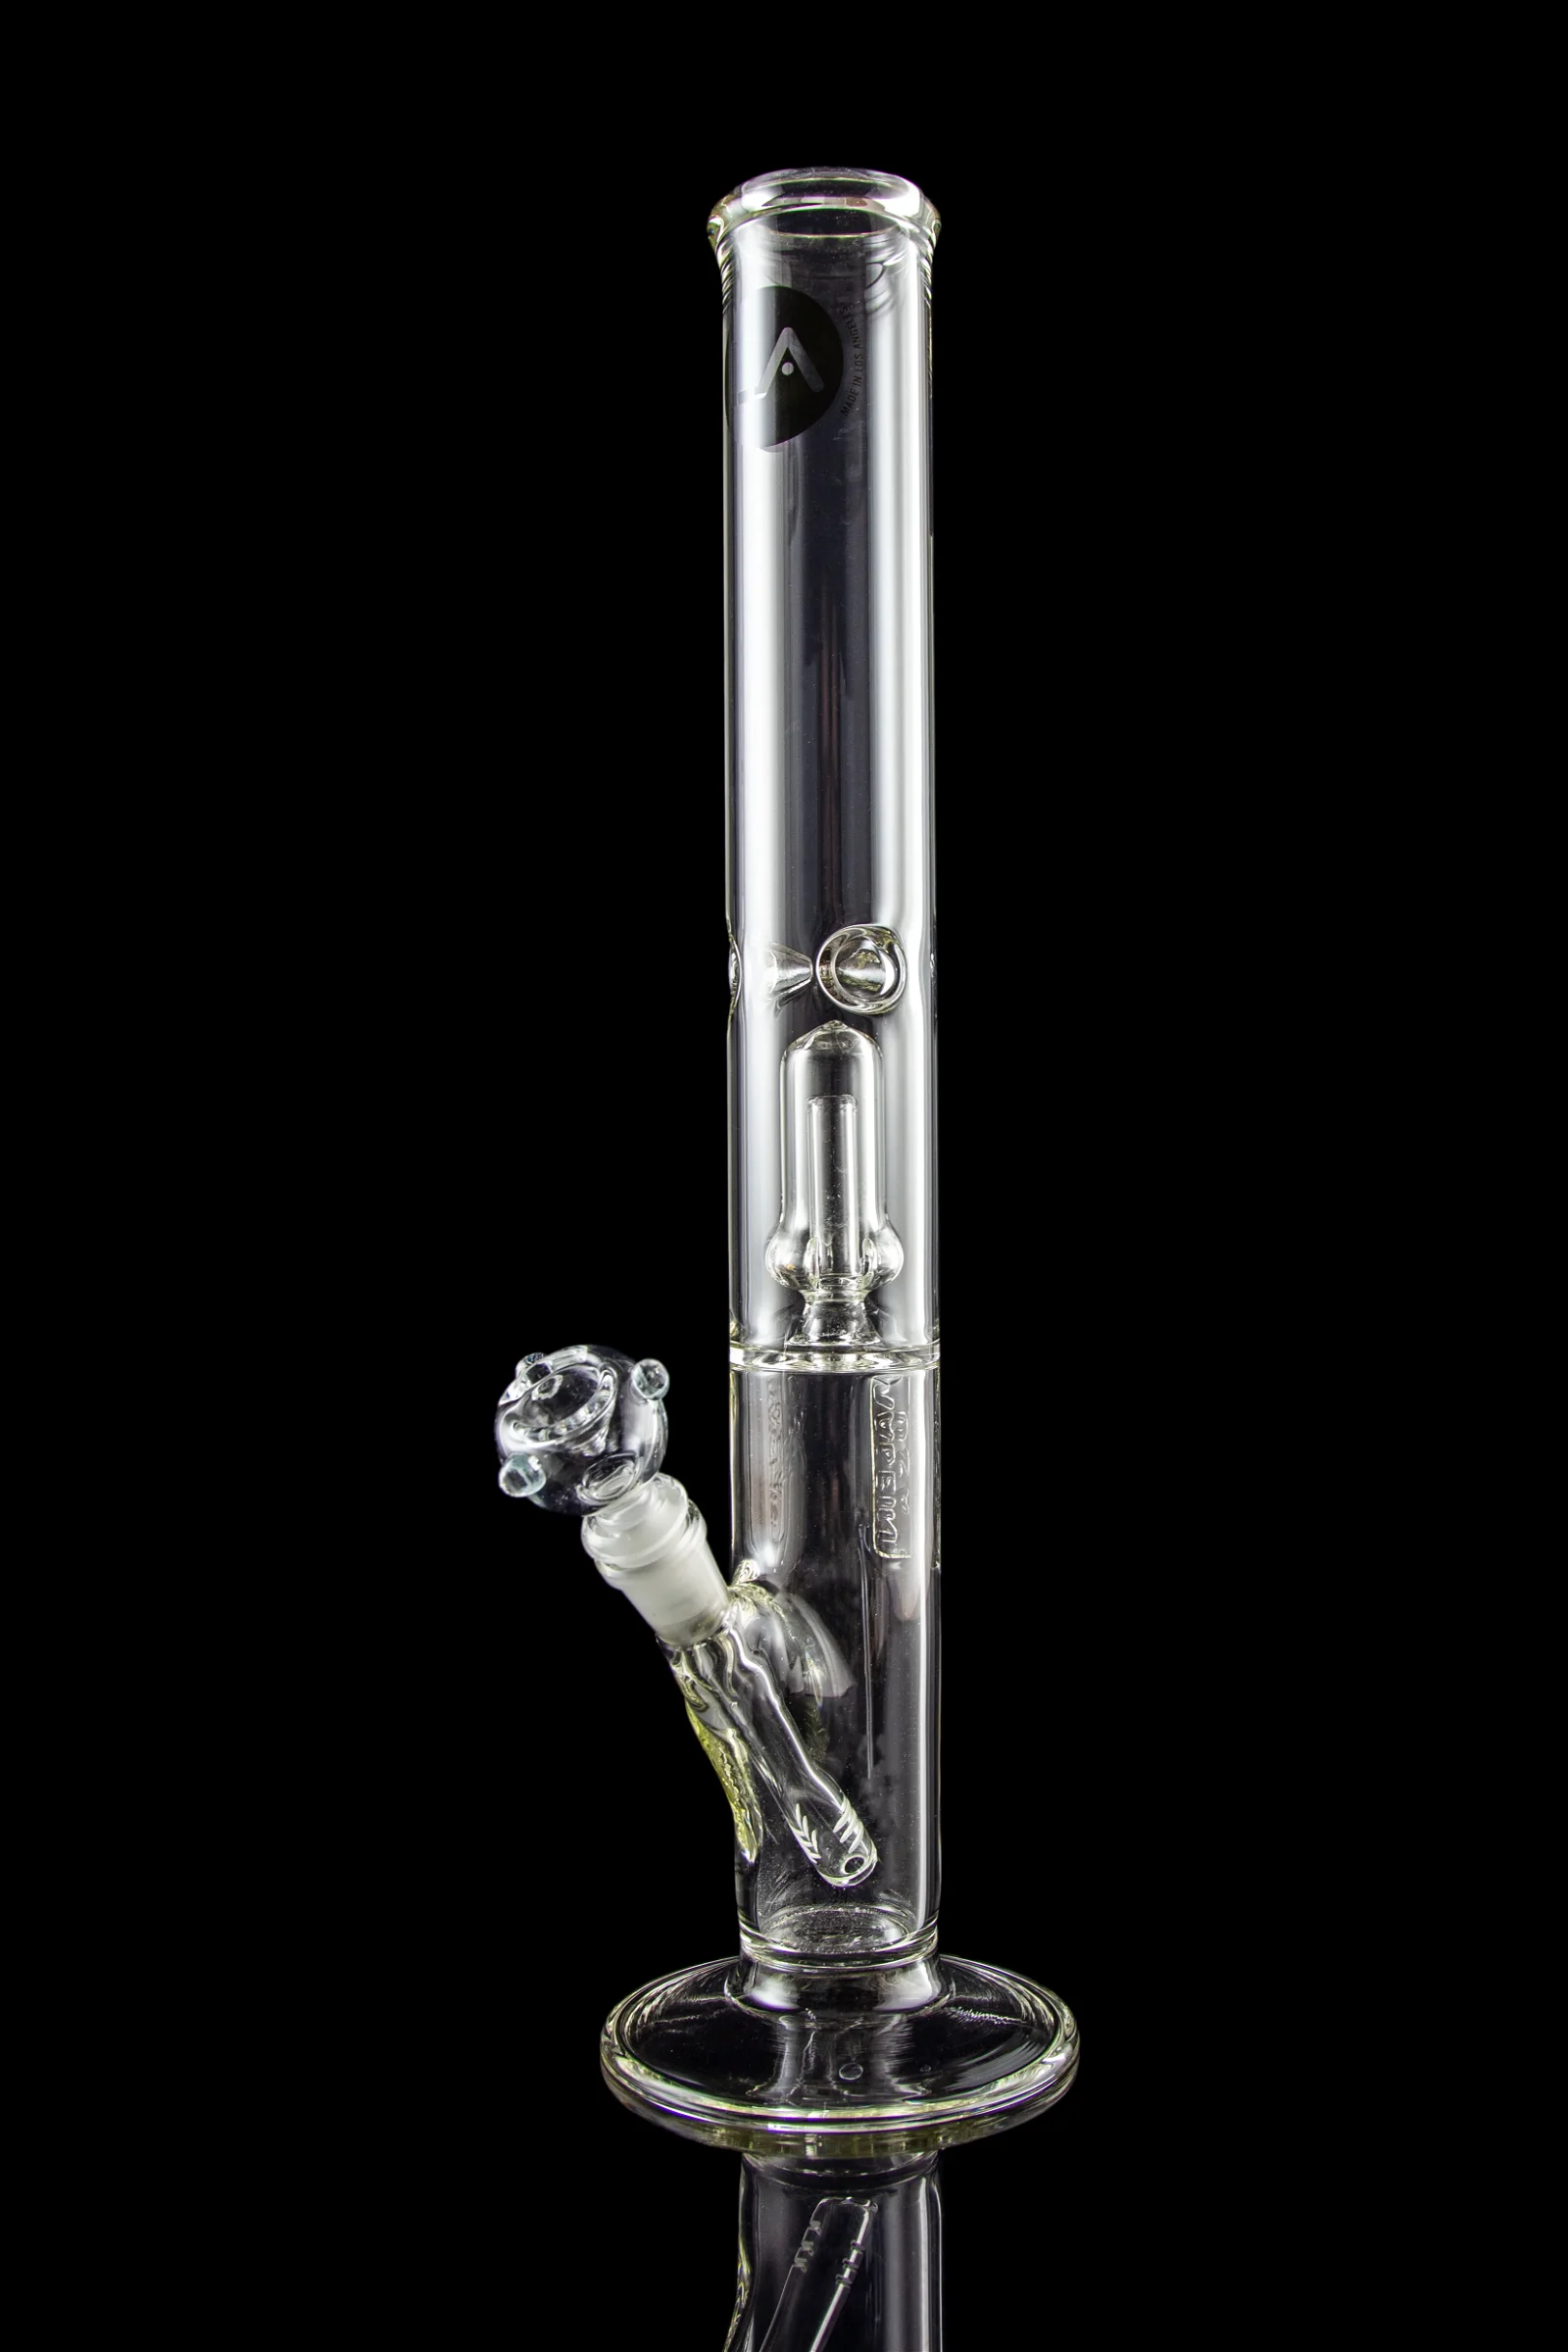 Image of LA Pipes Thick Glass Straight Tube Bong with Showerhead Perc - Available with Multiple Percs